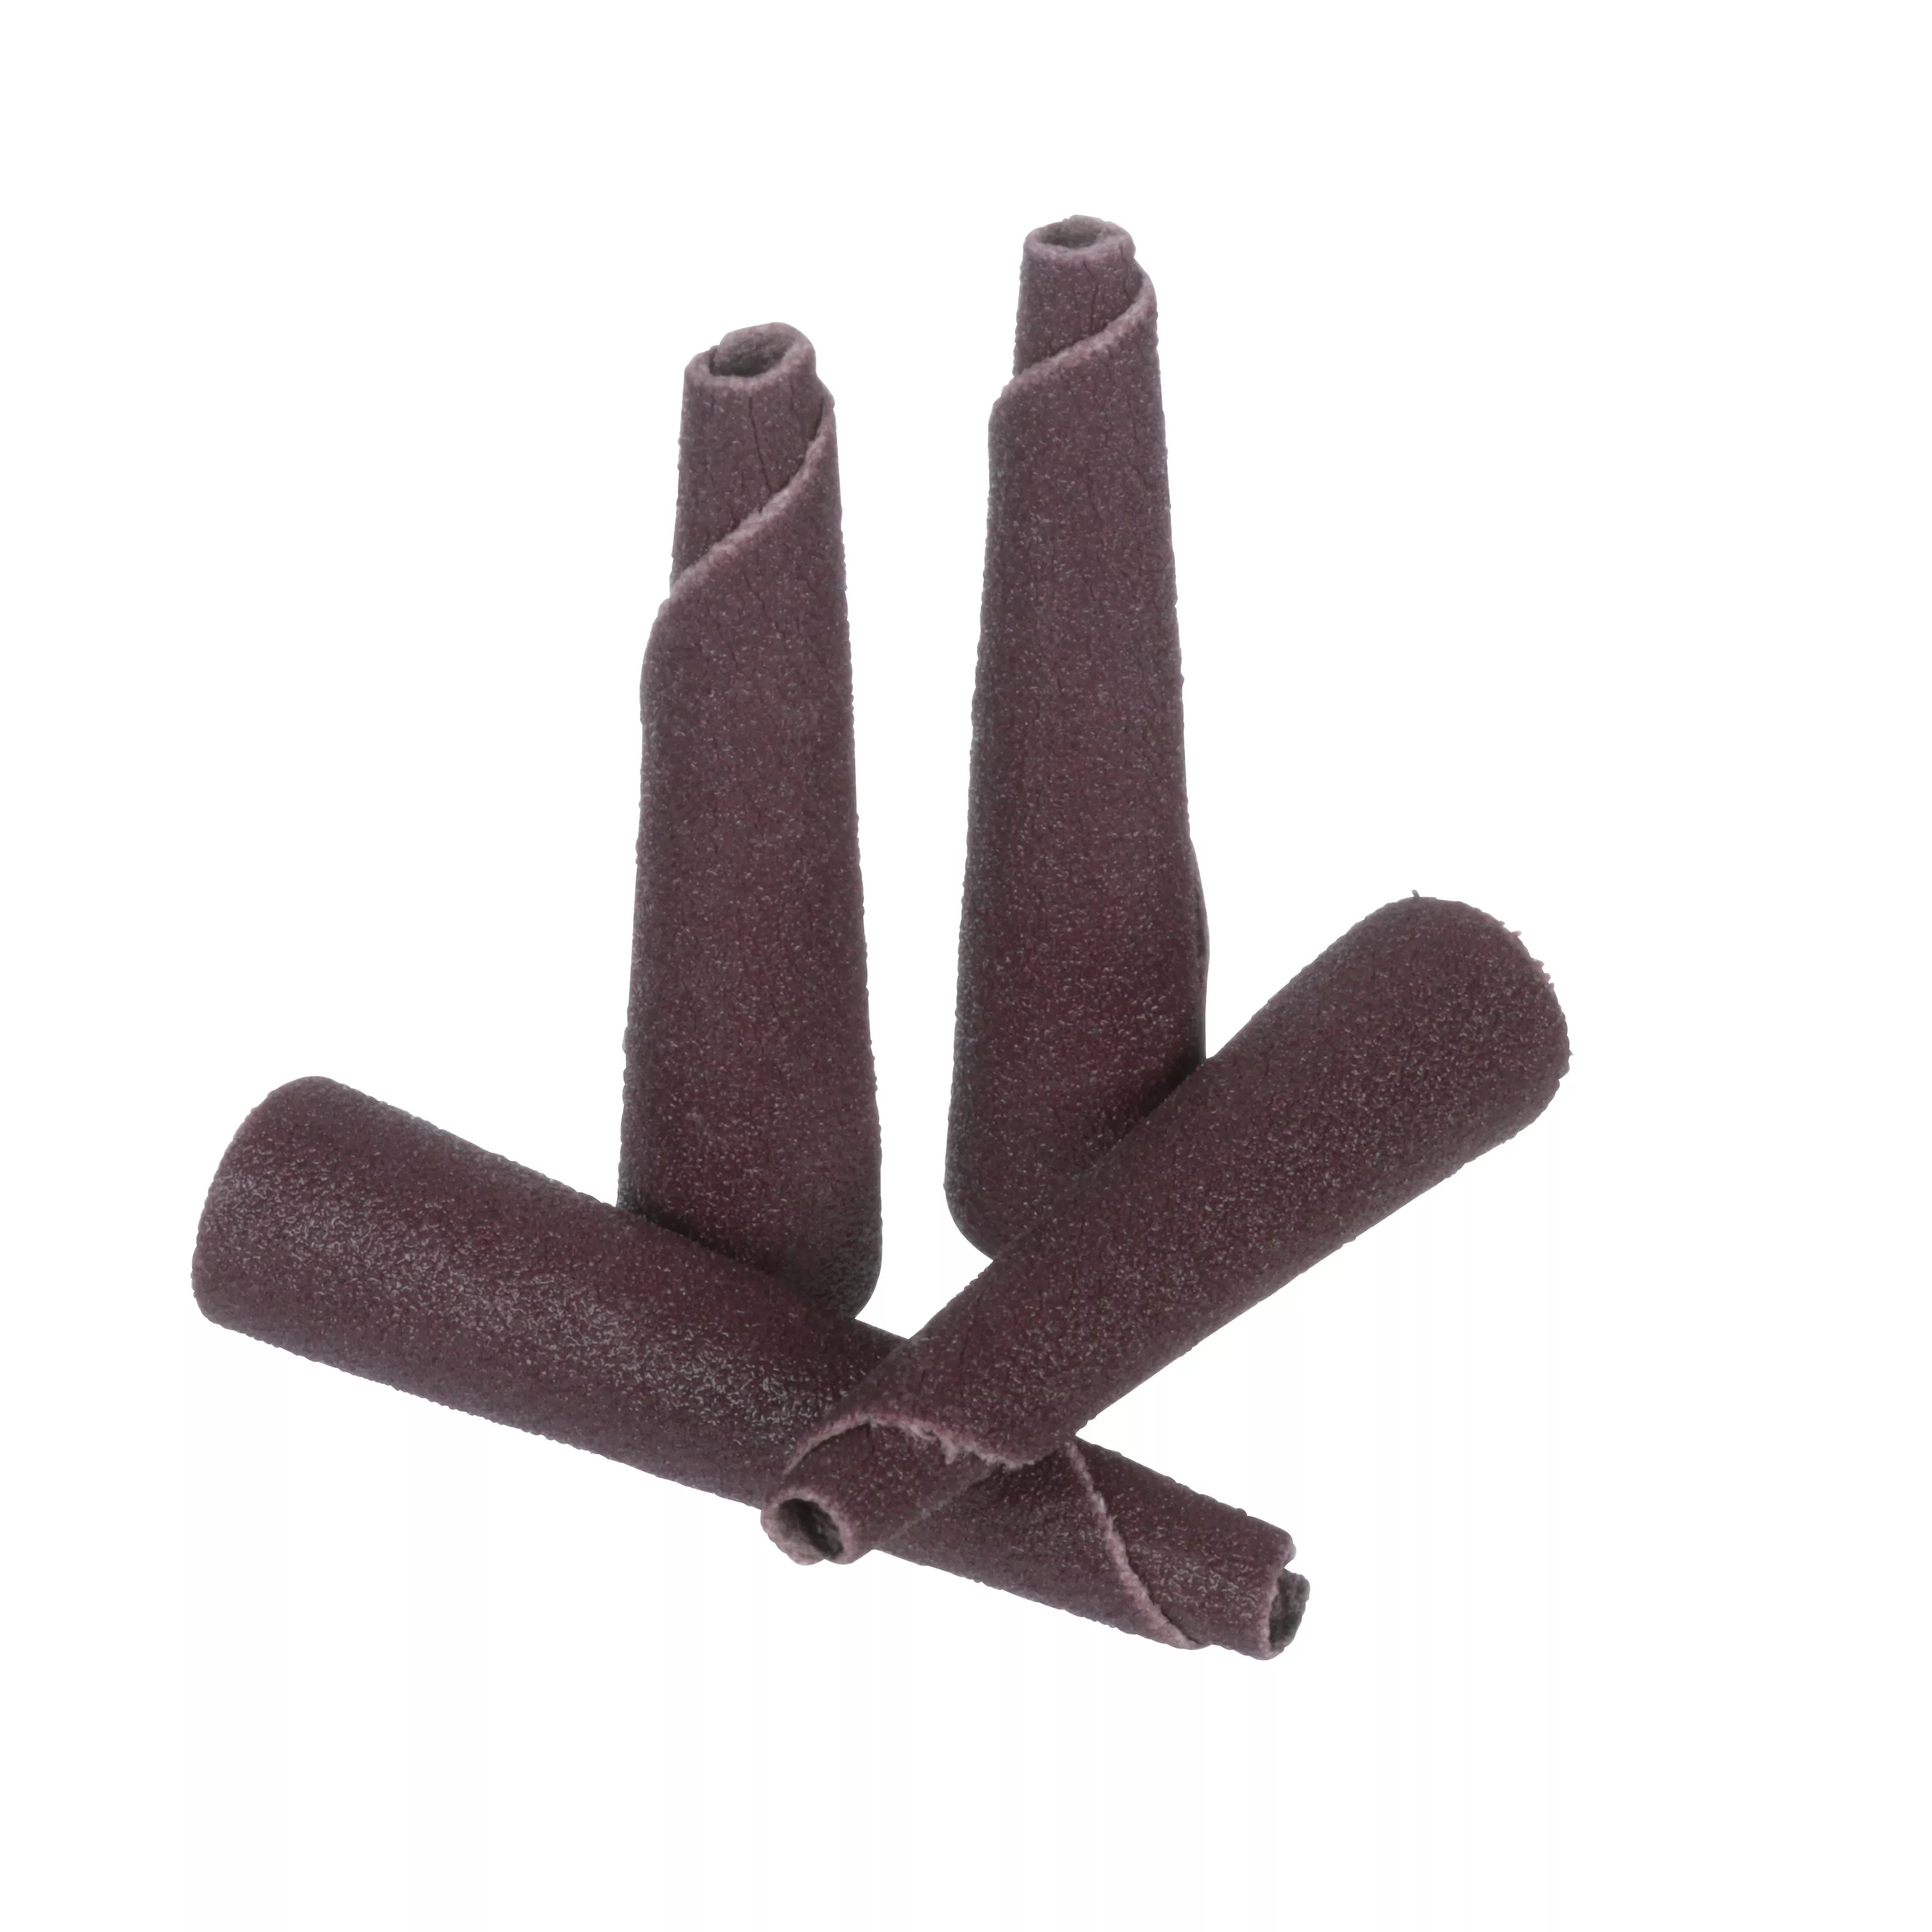 Standard Abrasives™ Aluminum Oxide Tapered Cone Point, 710130, C-30 120, 100 ea/Case